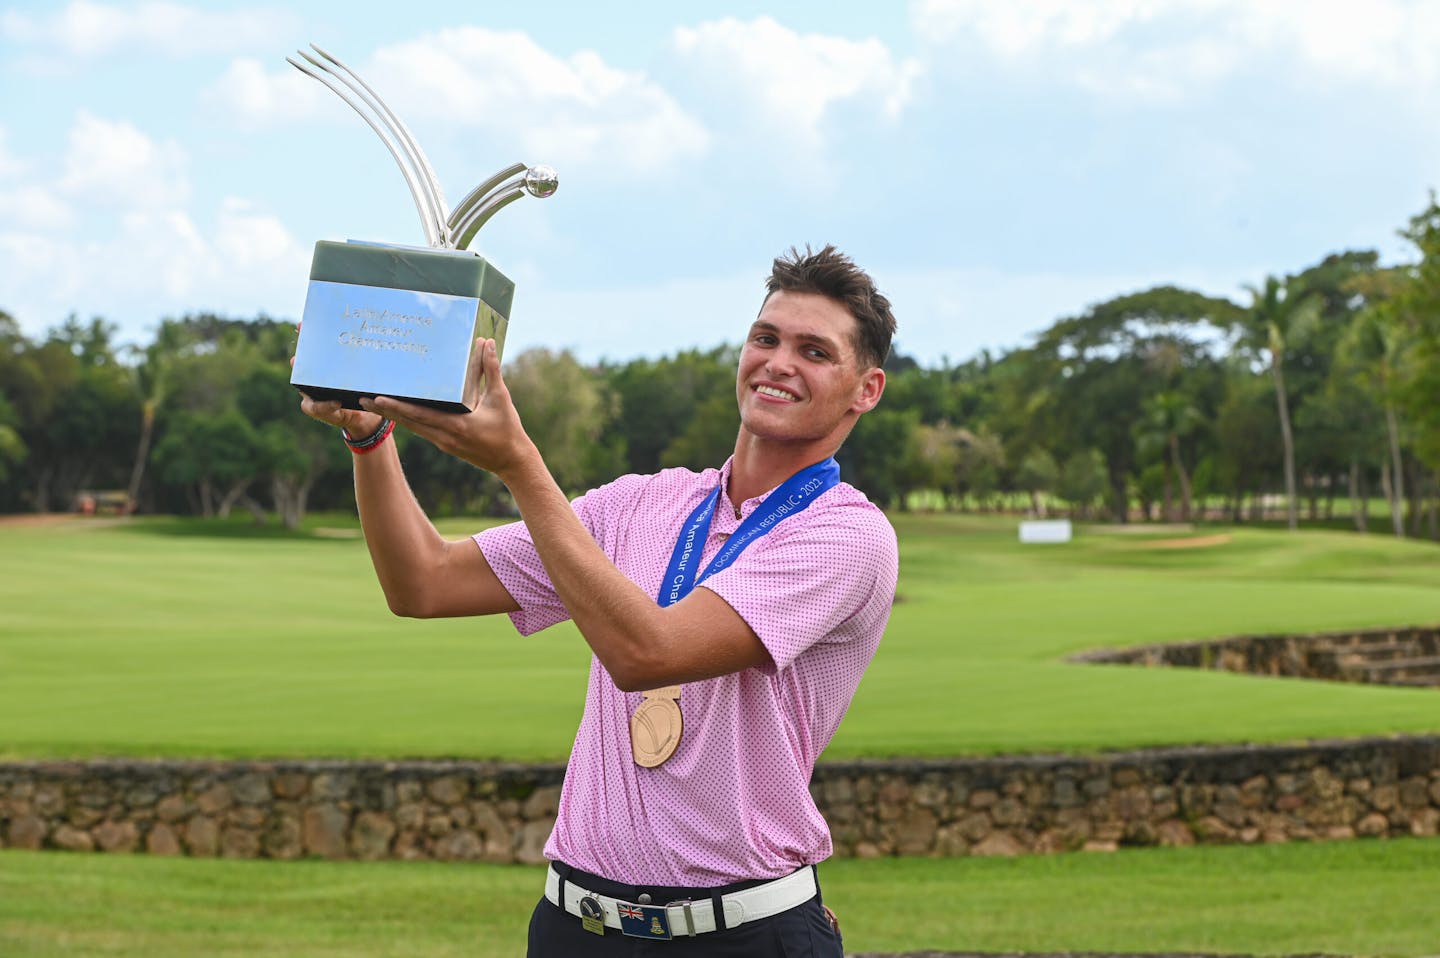 La Romana, DOMINICAN REPUBLIC: Aaron Jarvis of Cayman Islands pictured at the 2022 Latin America Amateur Championship at Casa de Campo Resort during Trophy Presentation on January 23rd, 2022.